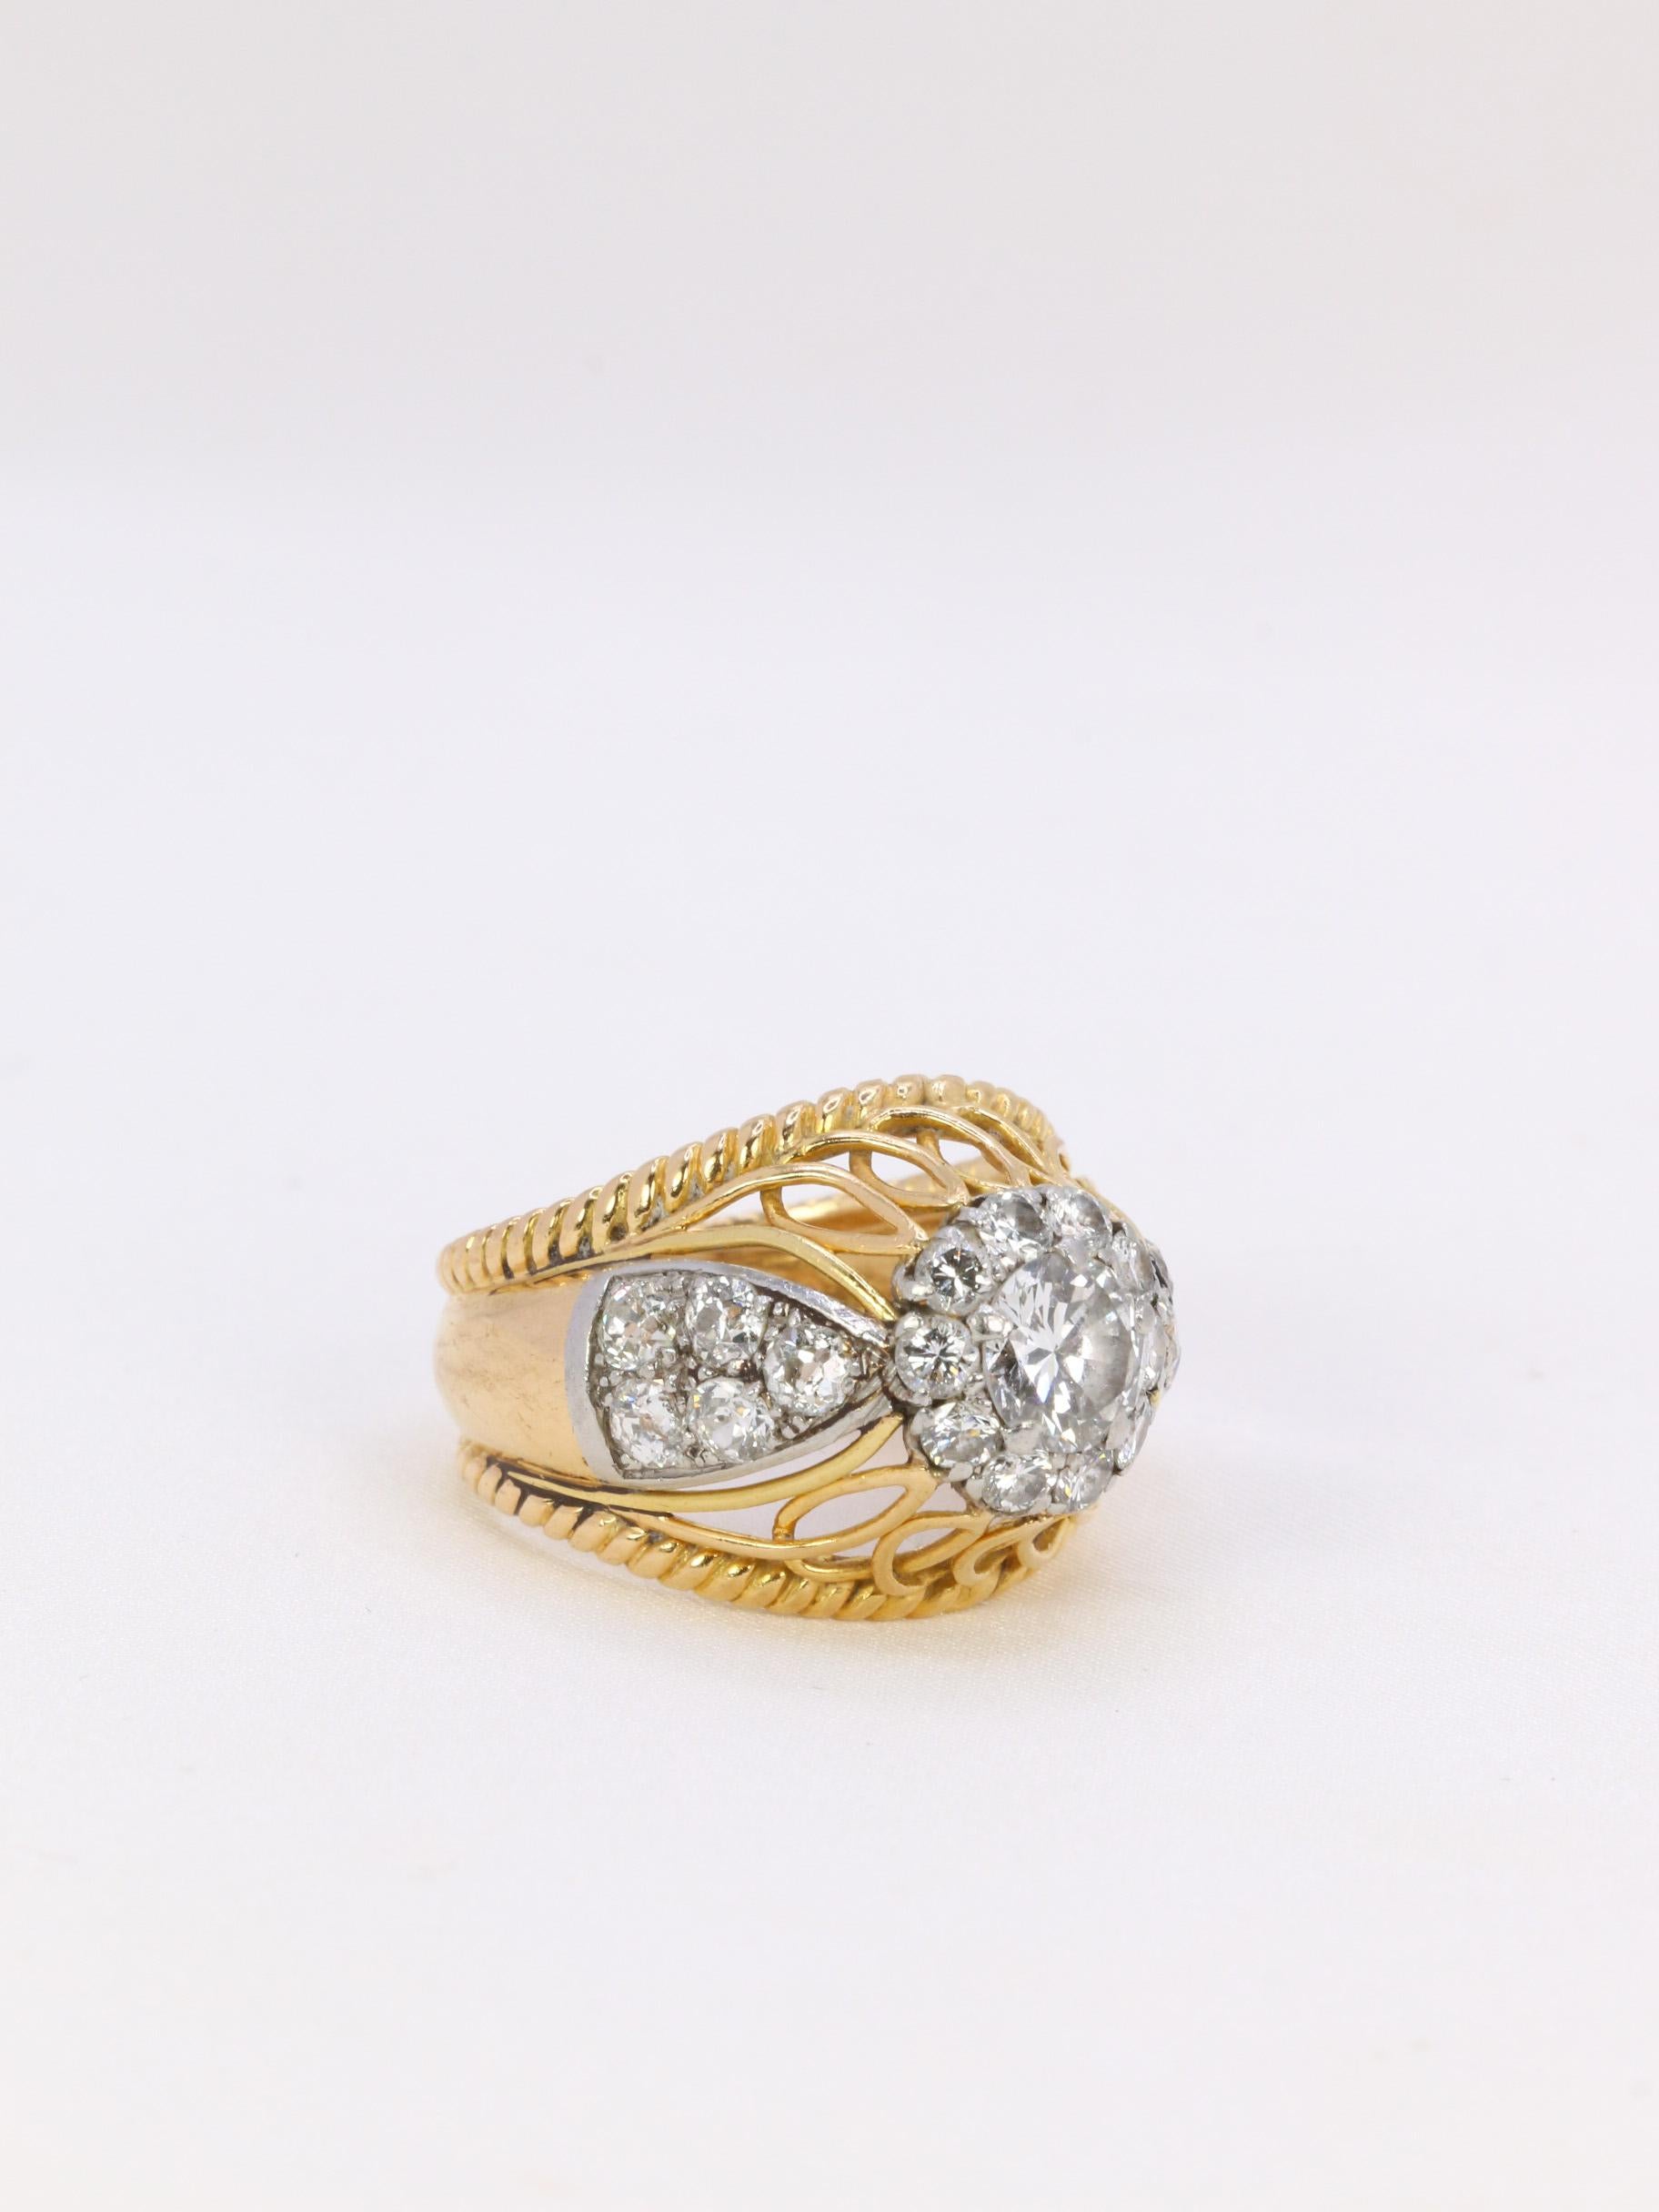 Retro Vintage dome ring in yellow gold, platinum and 1 ct central diamond For Sale